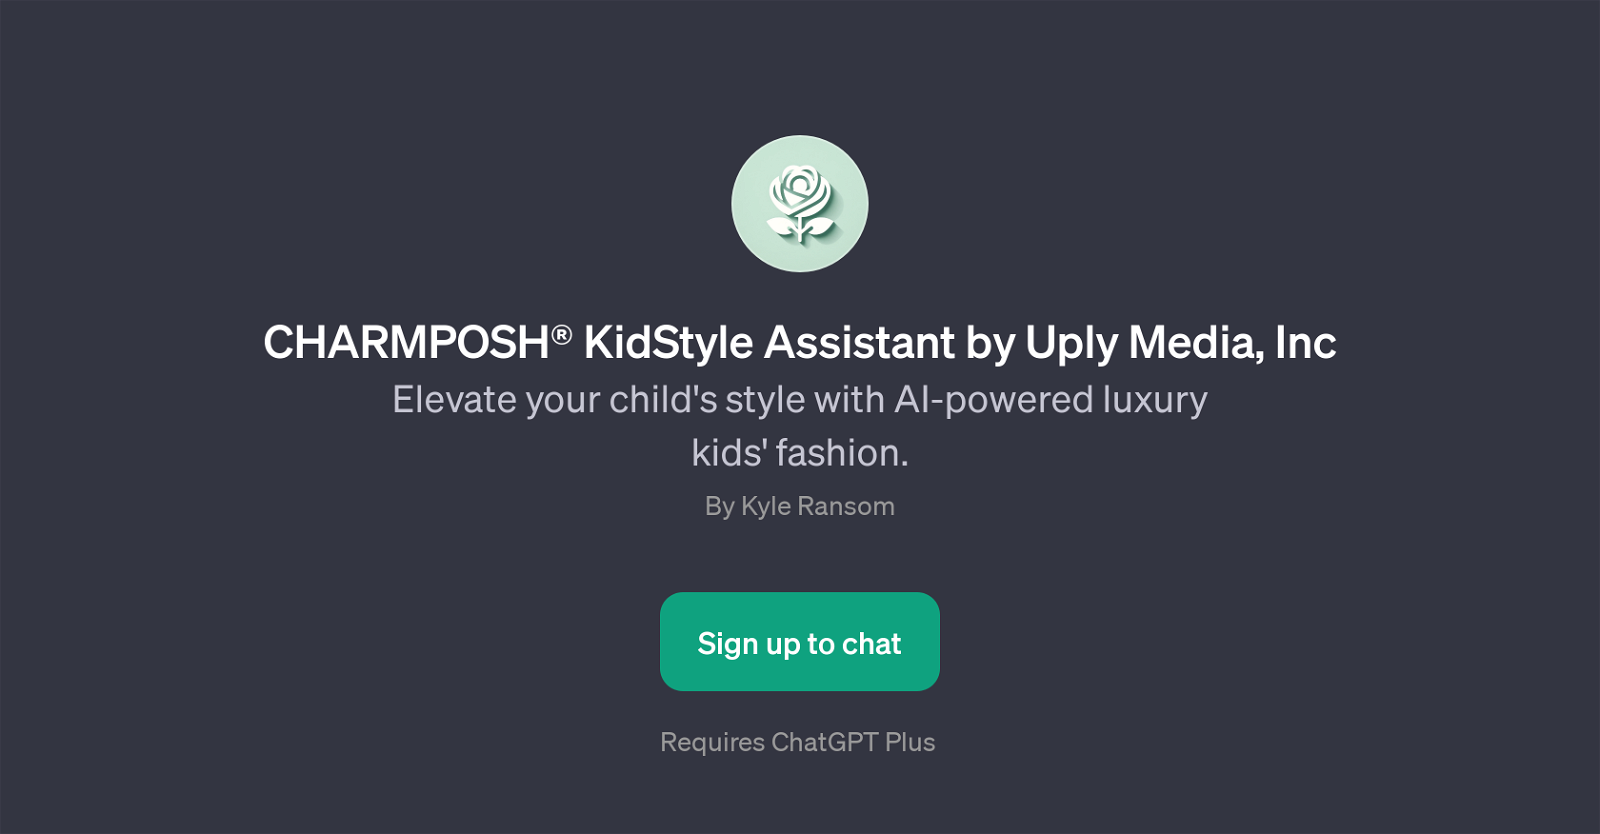 CHARMPOSH KidStyle Assistant by Uply Media, Inc website